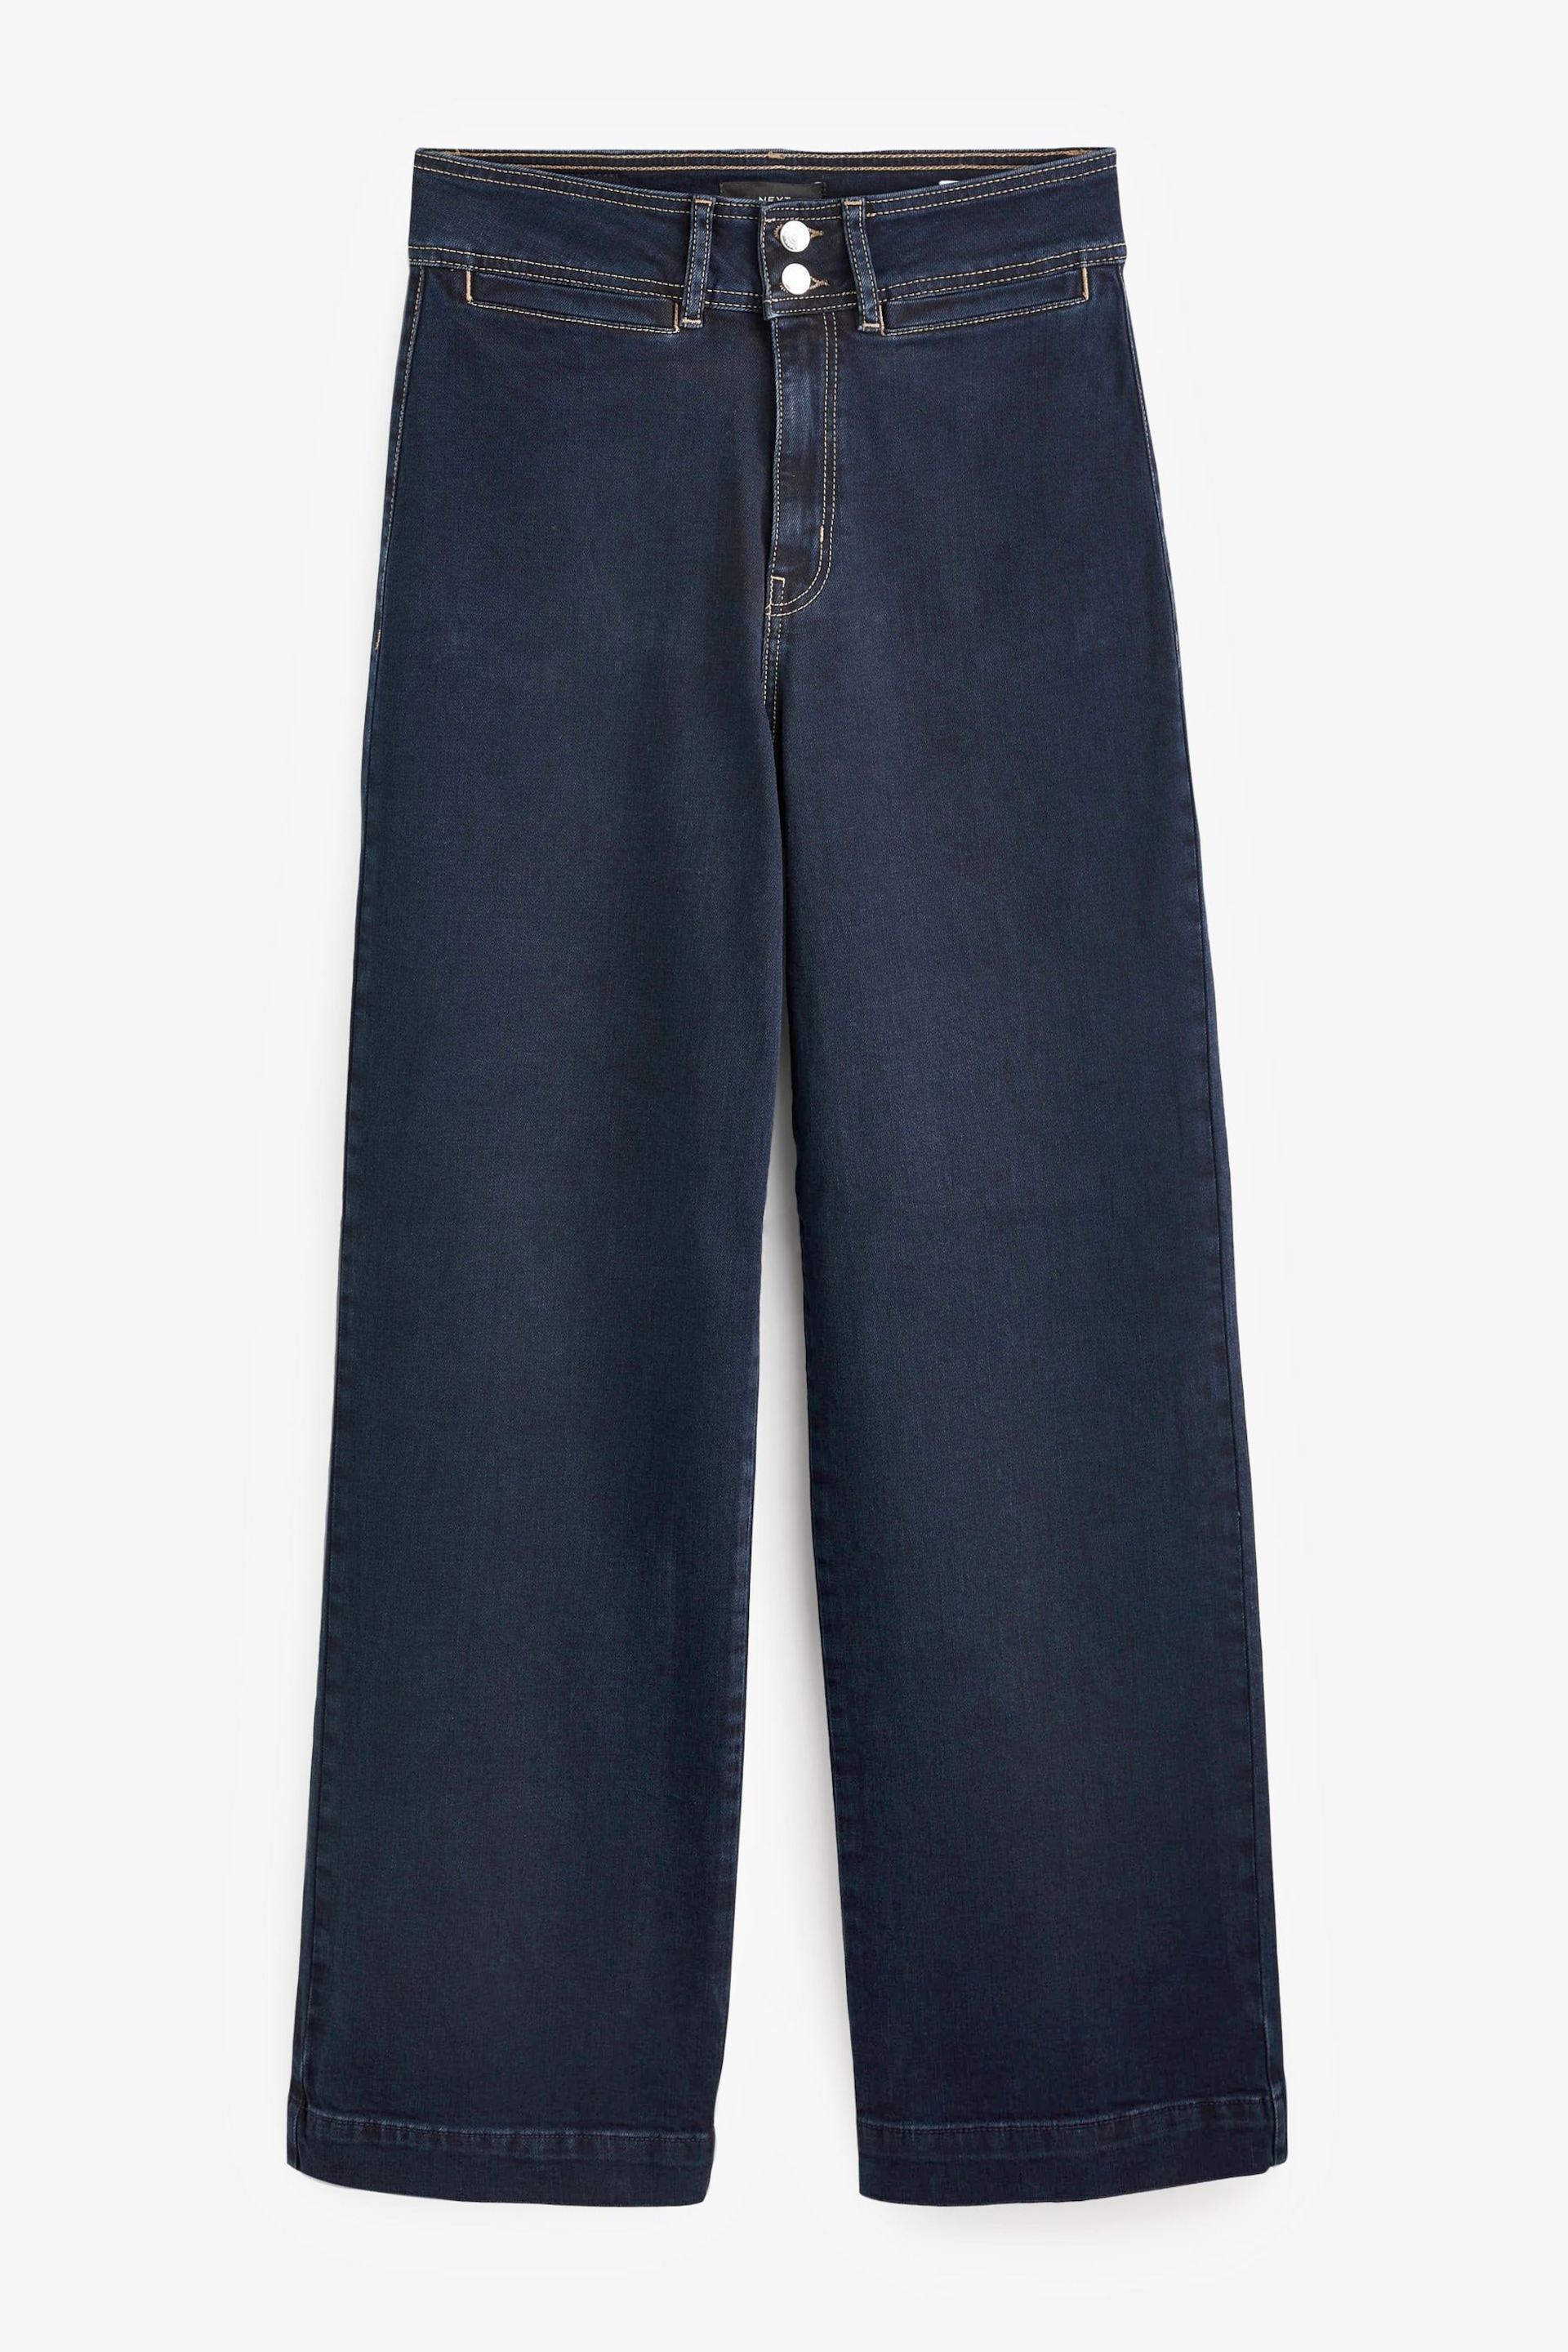 Denim Inky Blue Double Button Wide Leg Jeans - Image 5 of 6